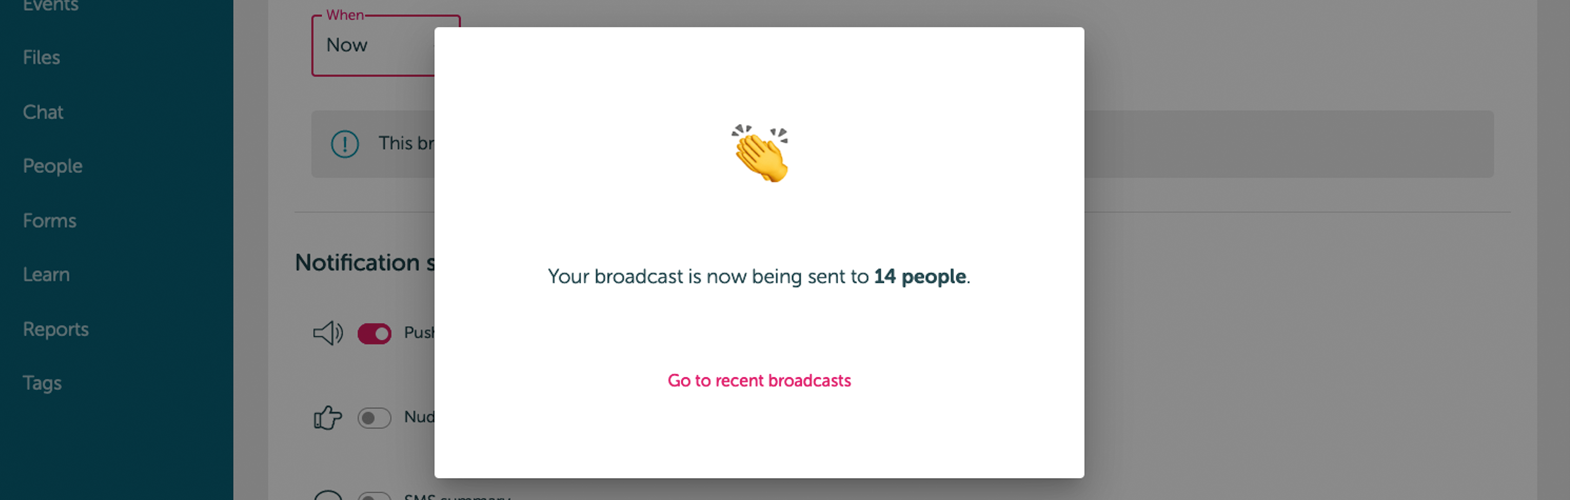 010921_Broadcasts_21.png